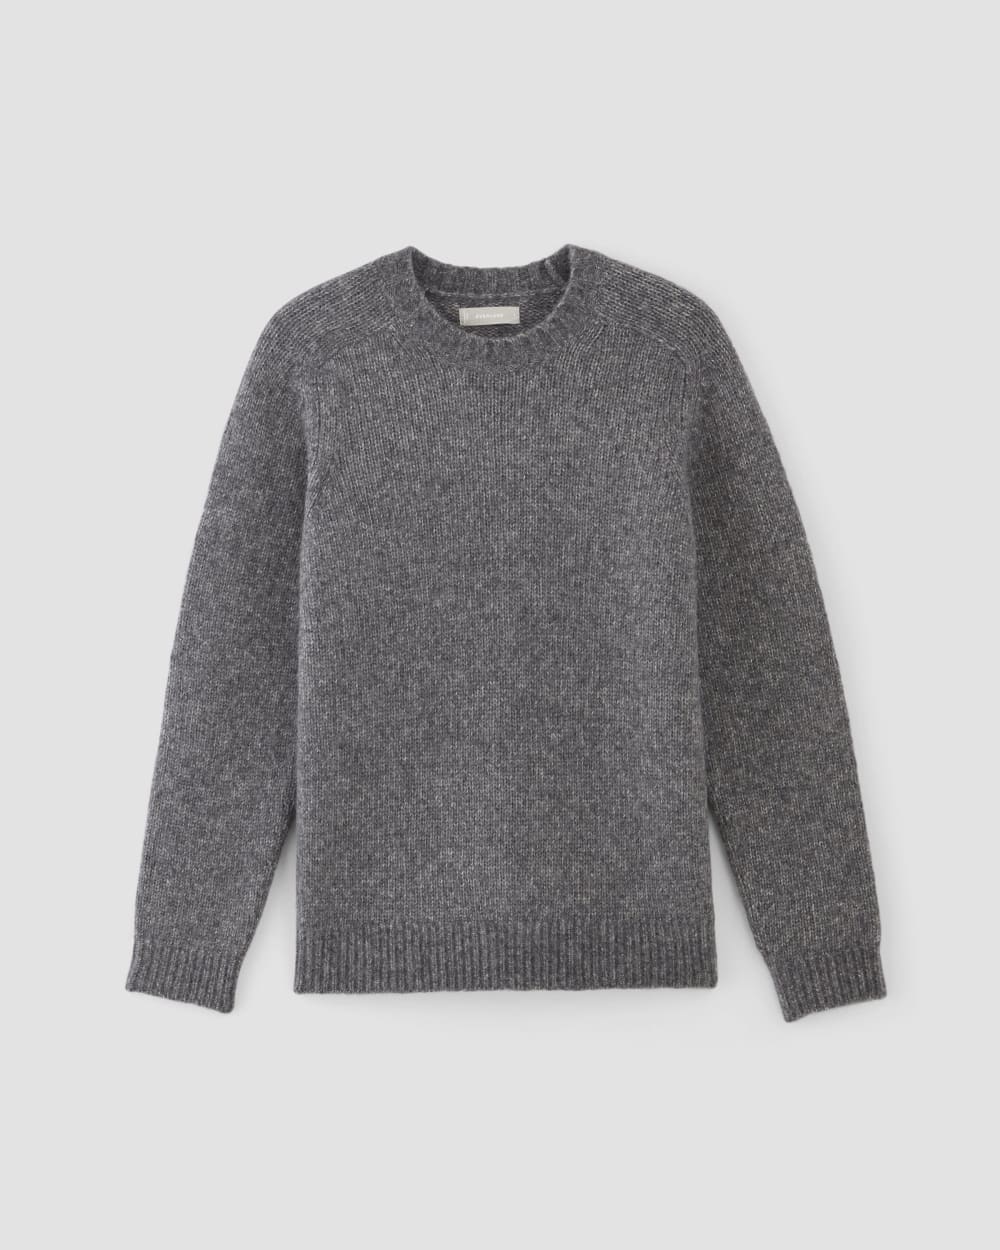 A Review Of 3 New Favs At Everlane: The Cloud Sweater, ReNew